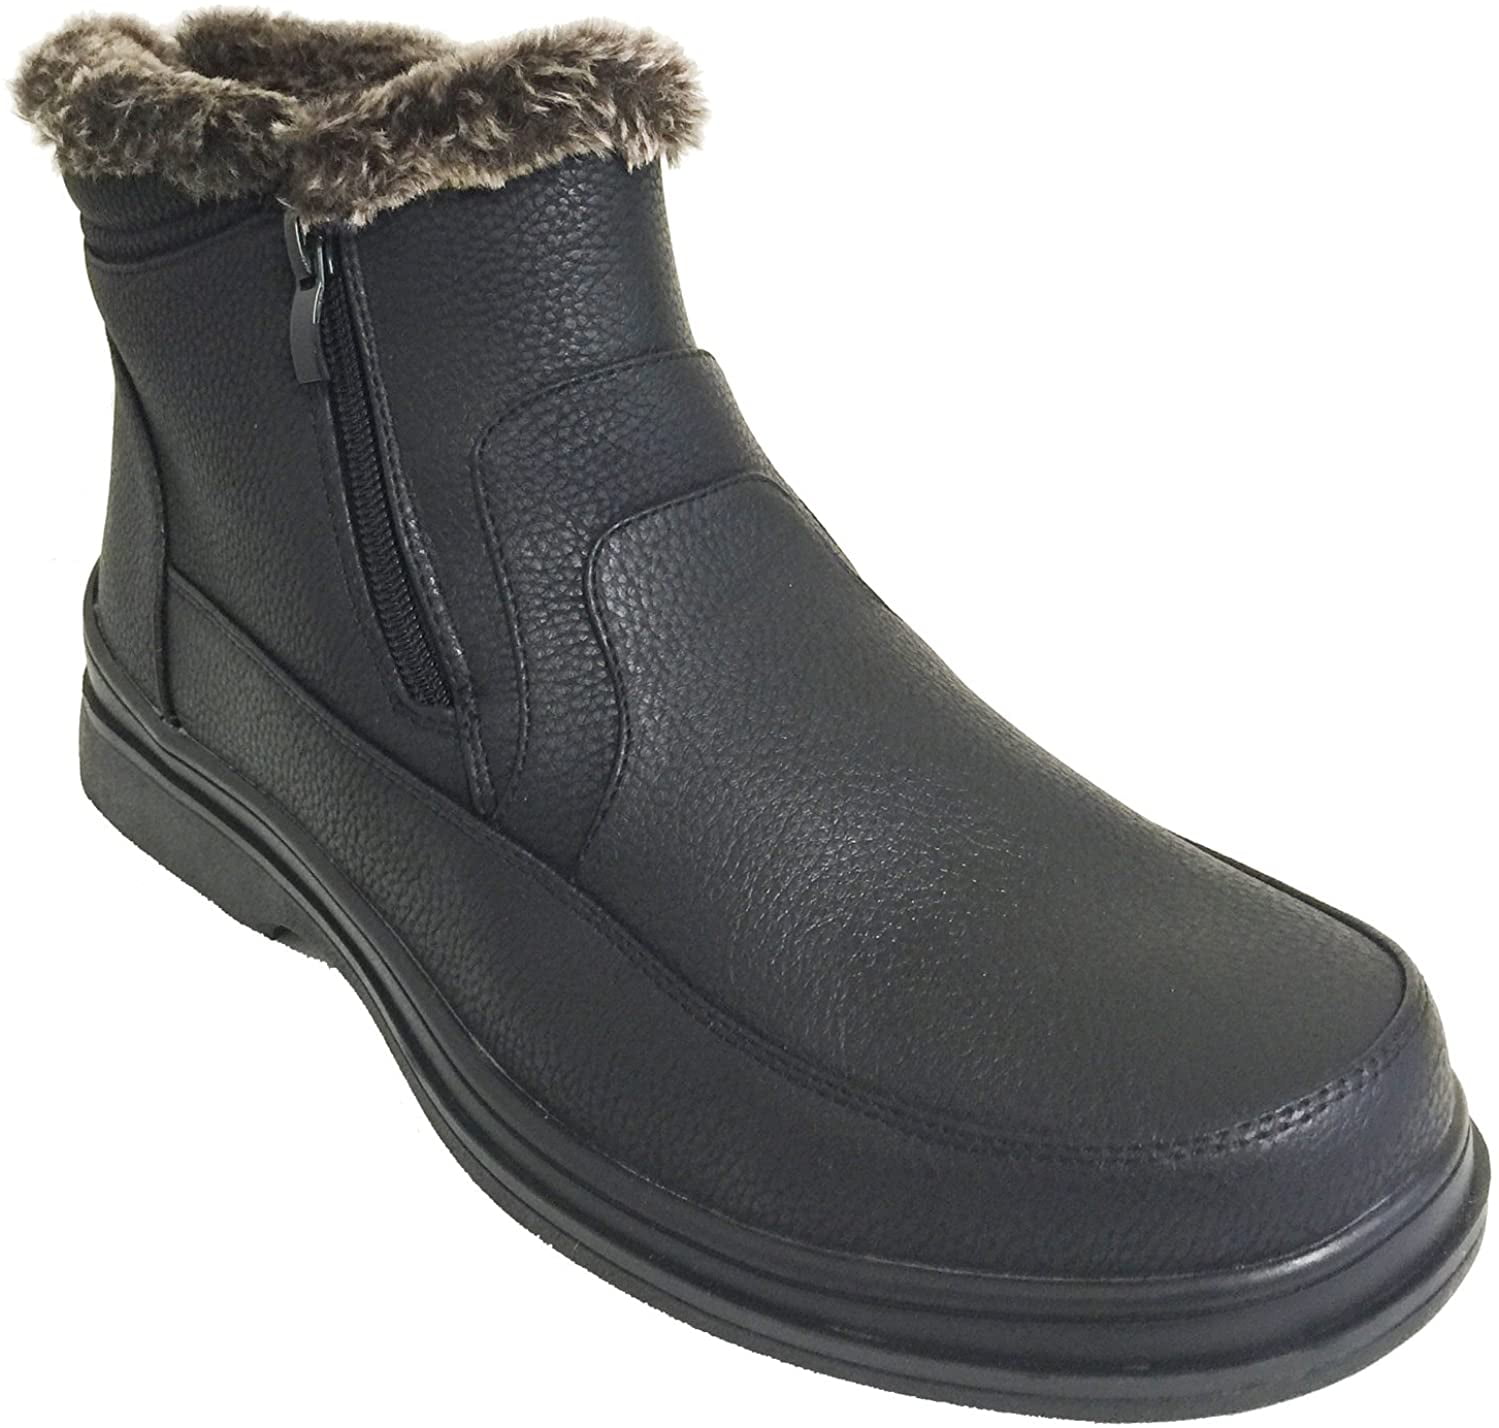 Mens outdoors fur lined Warm Thicken Snow Side Zip Ankle Boots casual Shoes New 